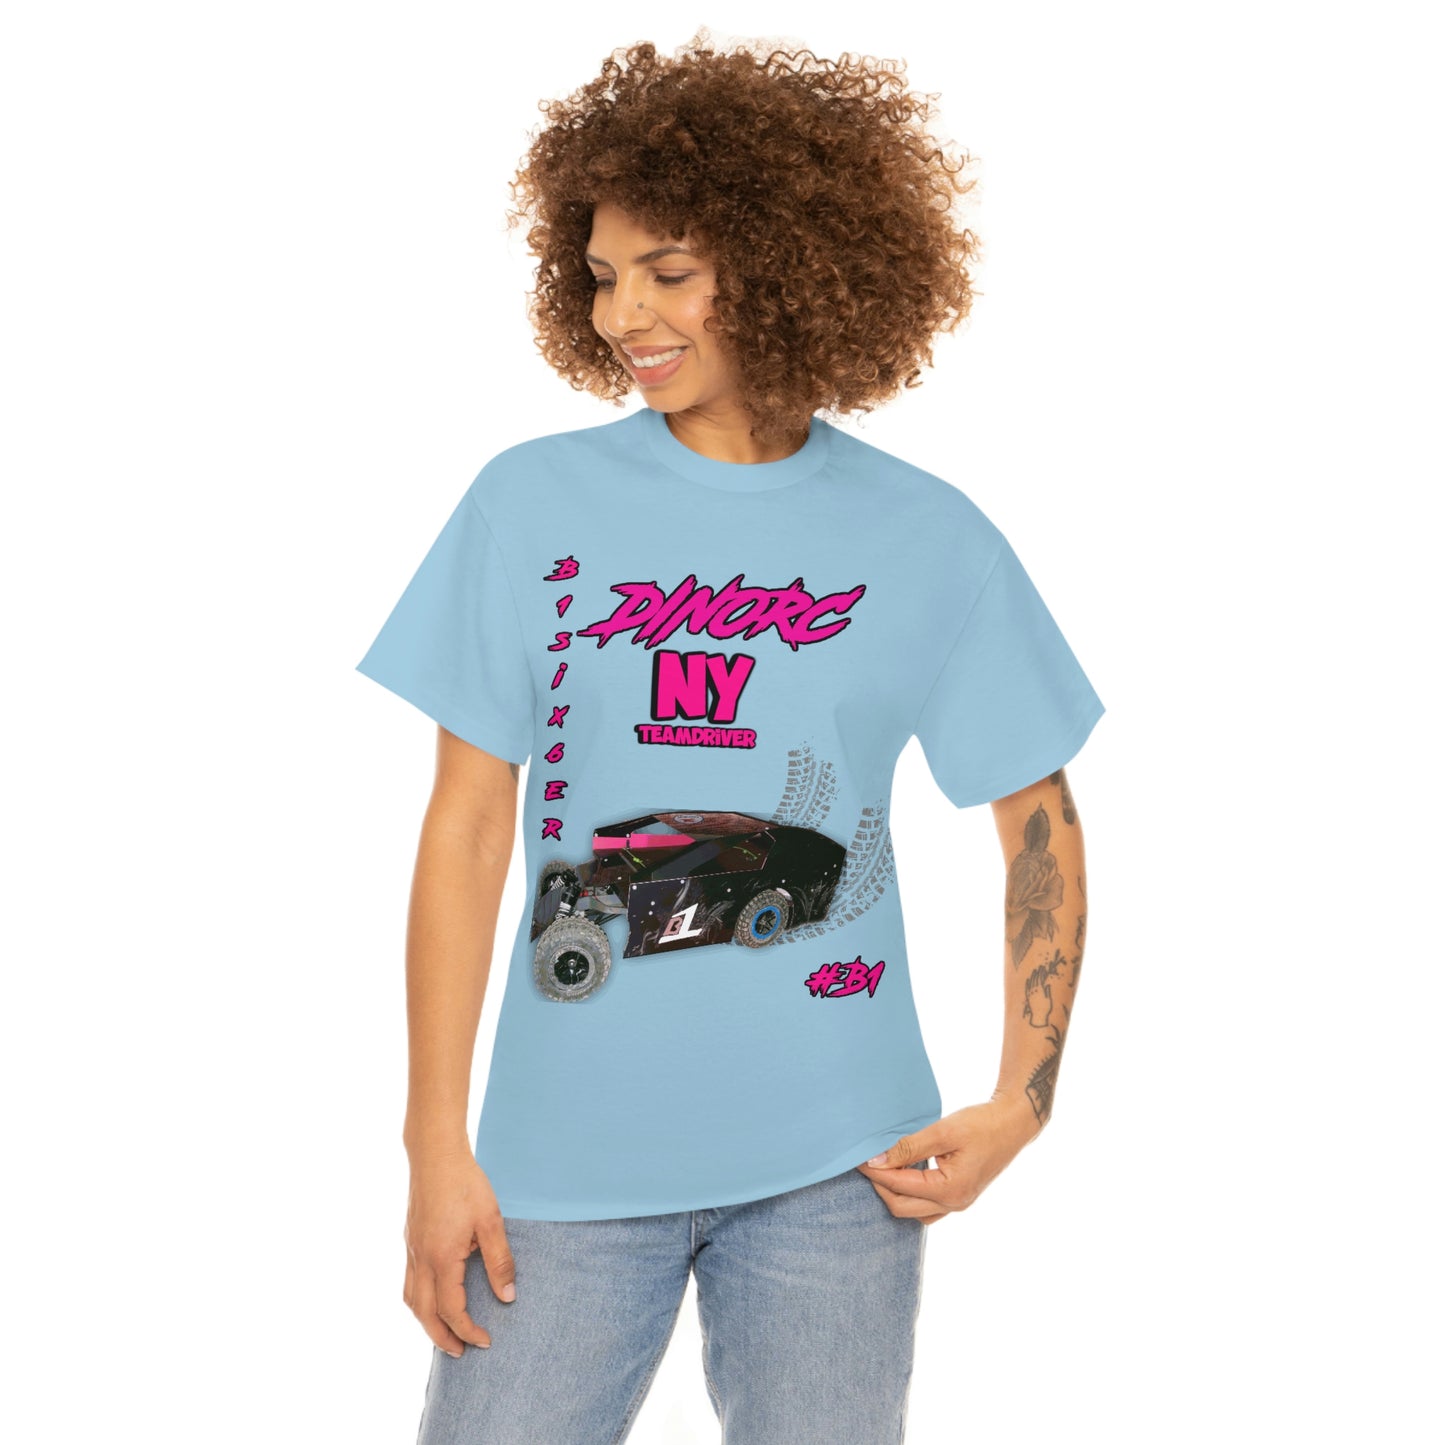 Team Driver Cherry Cherokee   Front and Back DinoRc Logo T-Shirt S-5x 5 colors